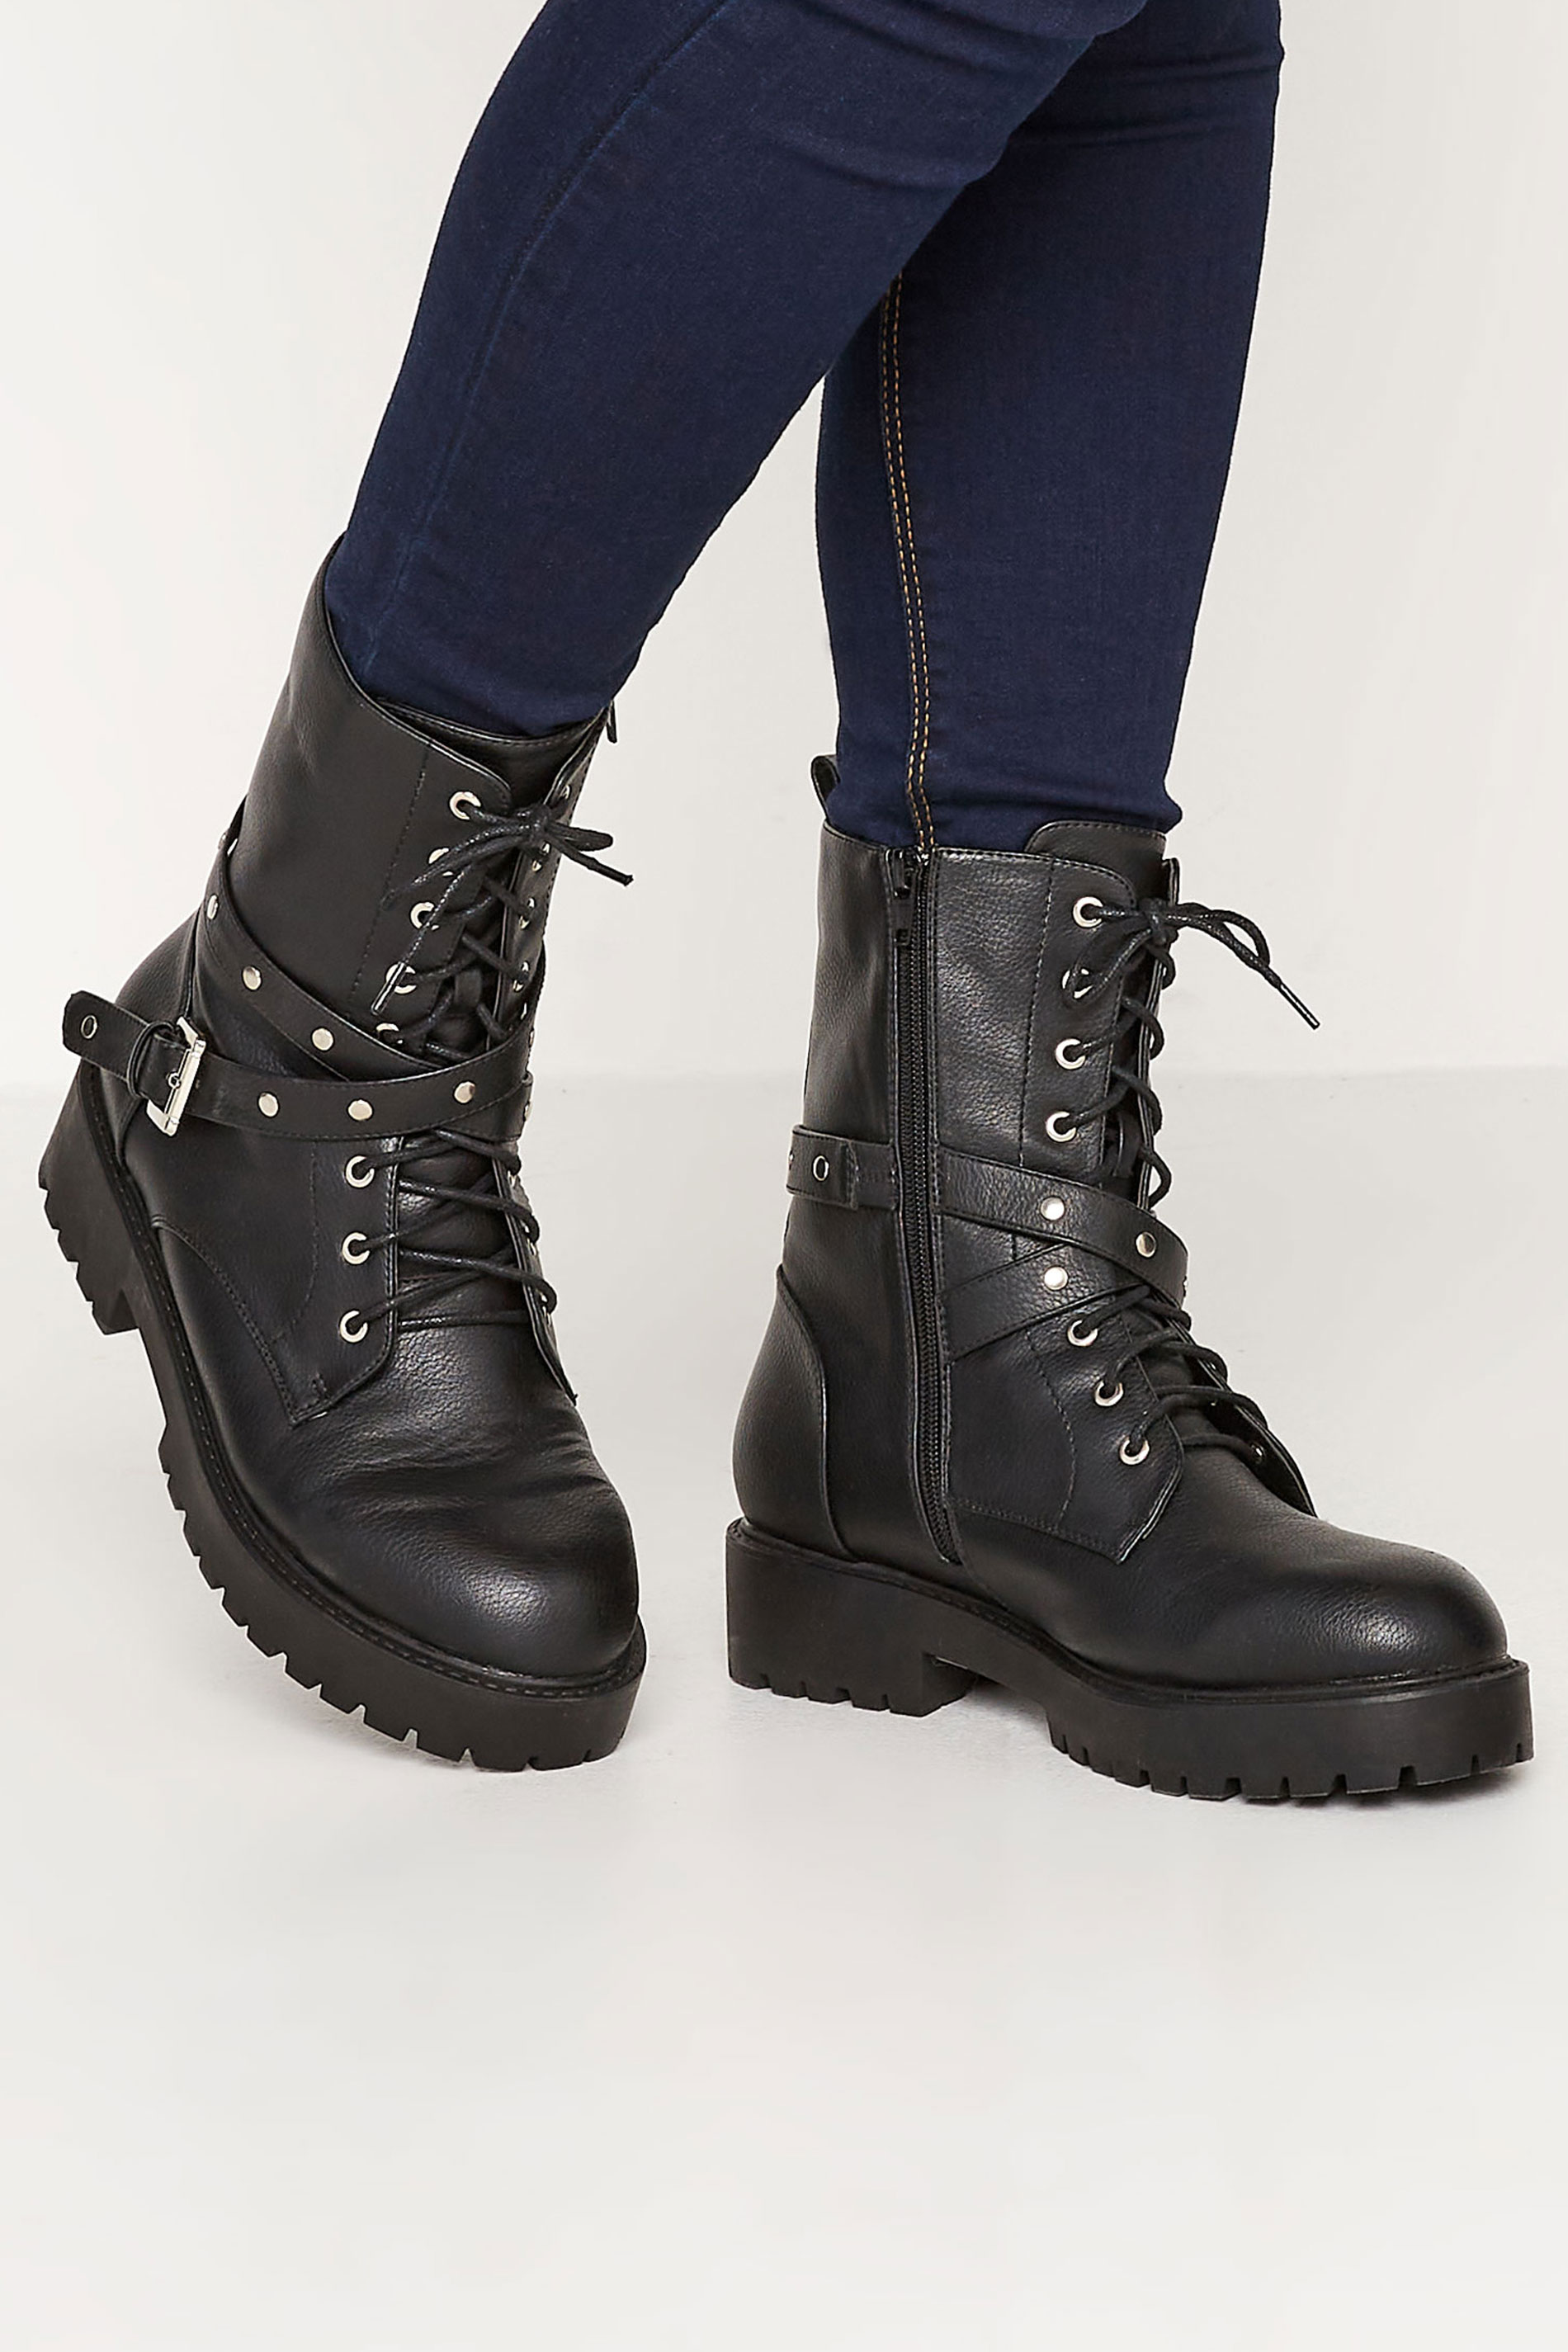 Black Studded Strap Lace Up Chunky Boots In Wide E Fit & Extra Wide EEE Fit 1